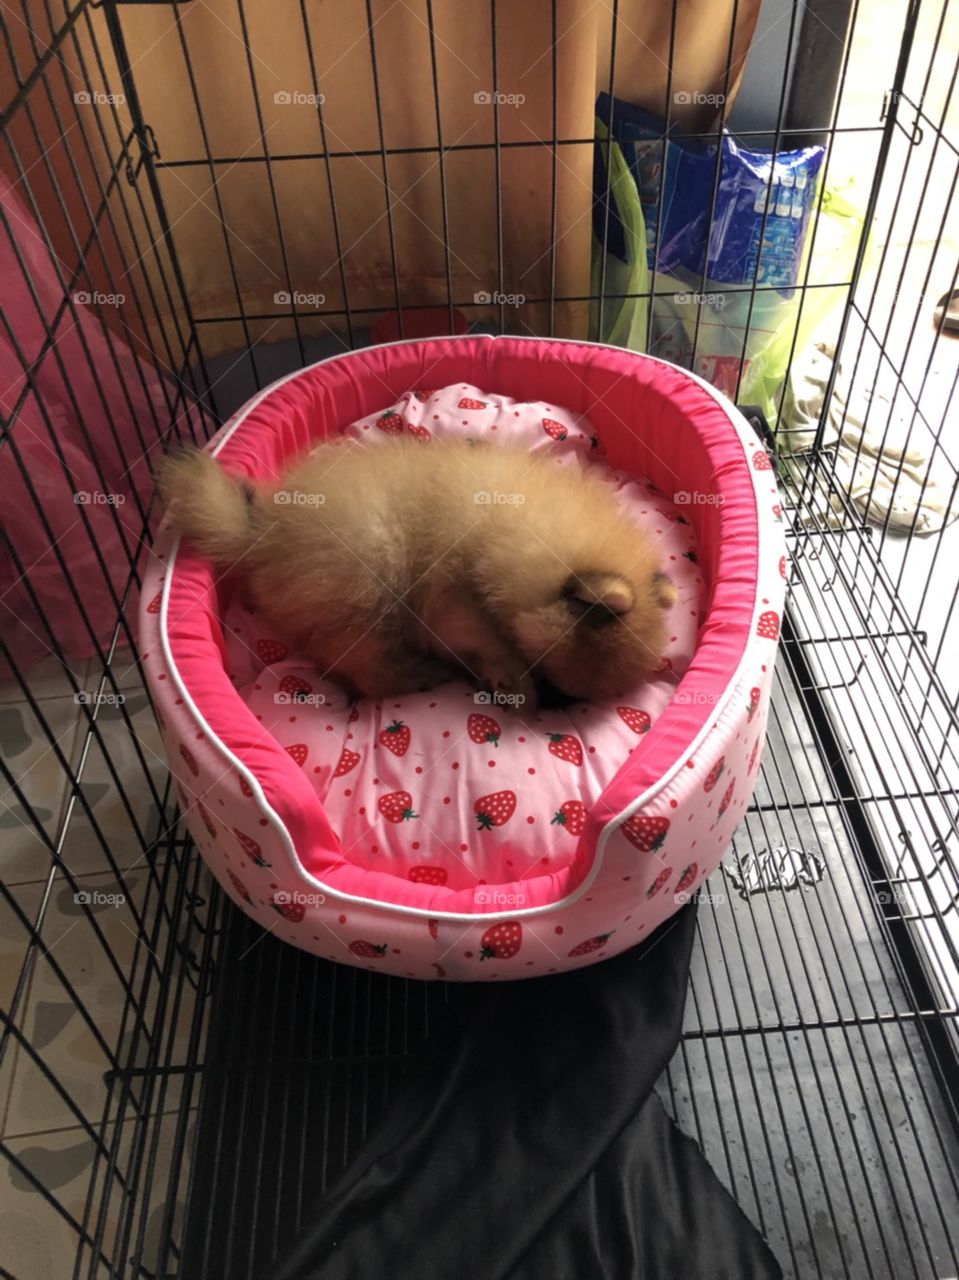 small lovely puppy "pomeranian" lieing on his stomach on his pink bed.